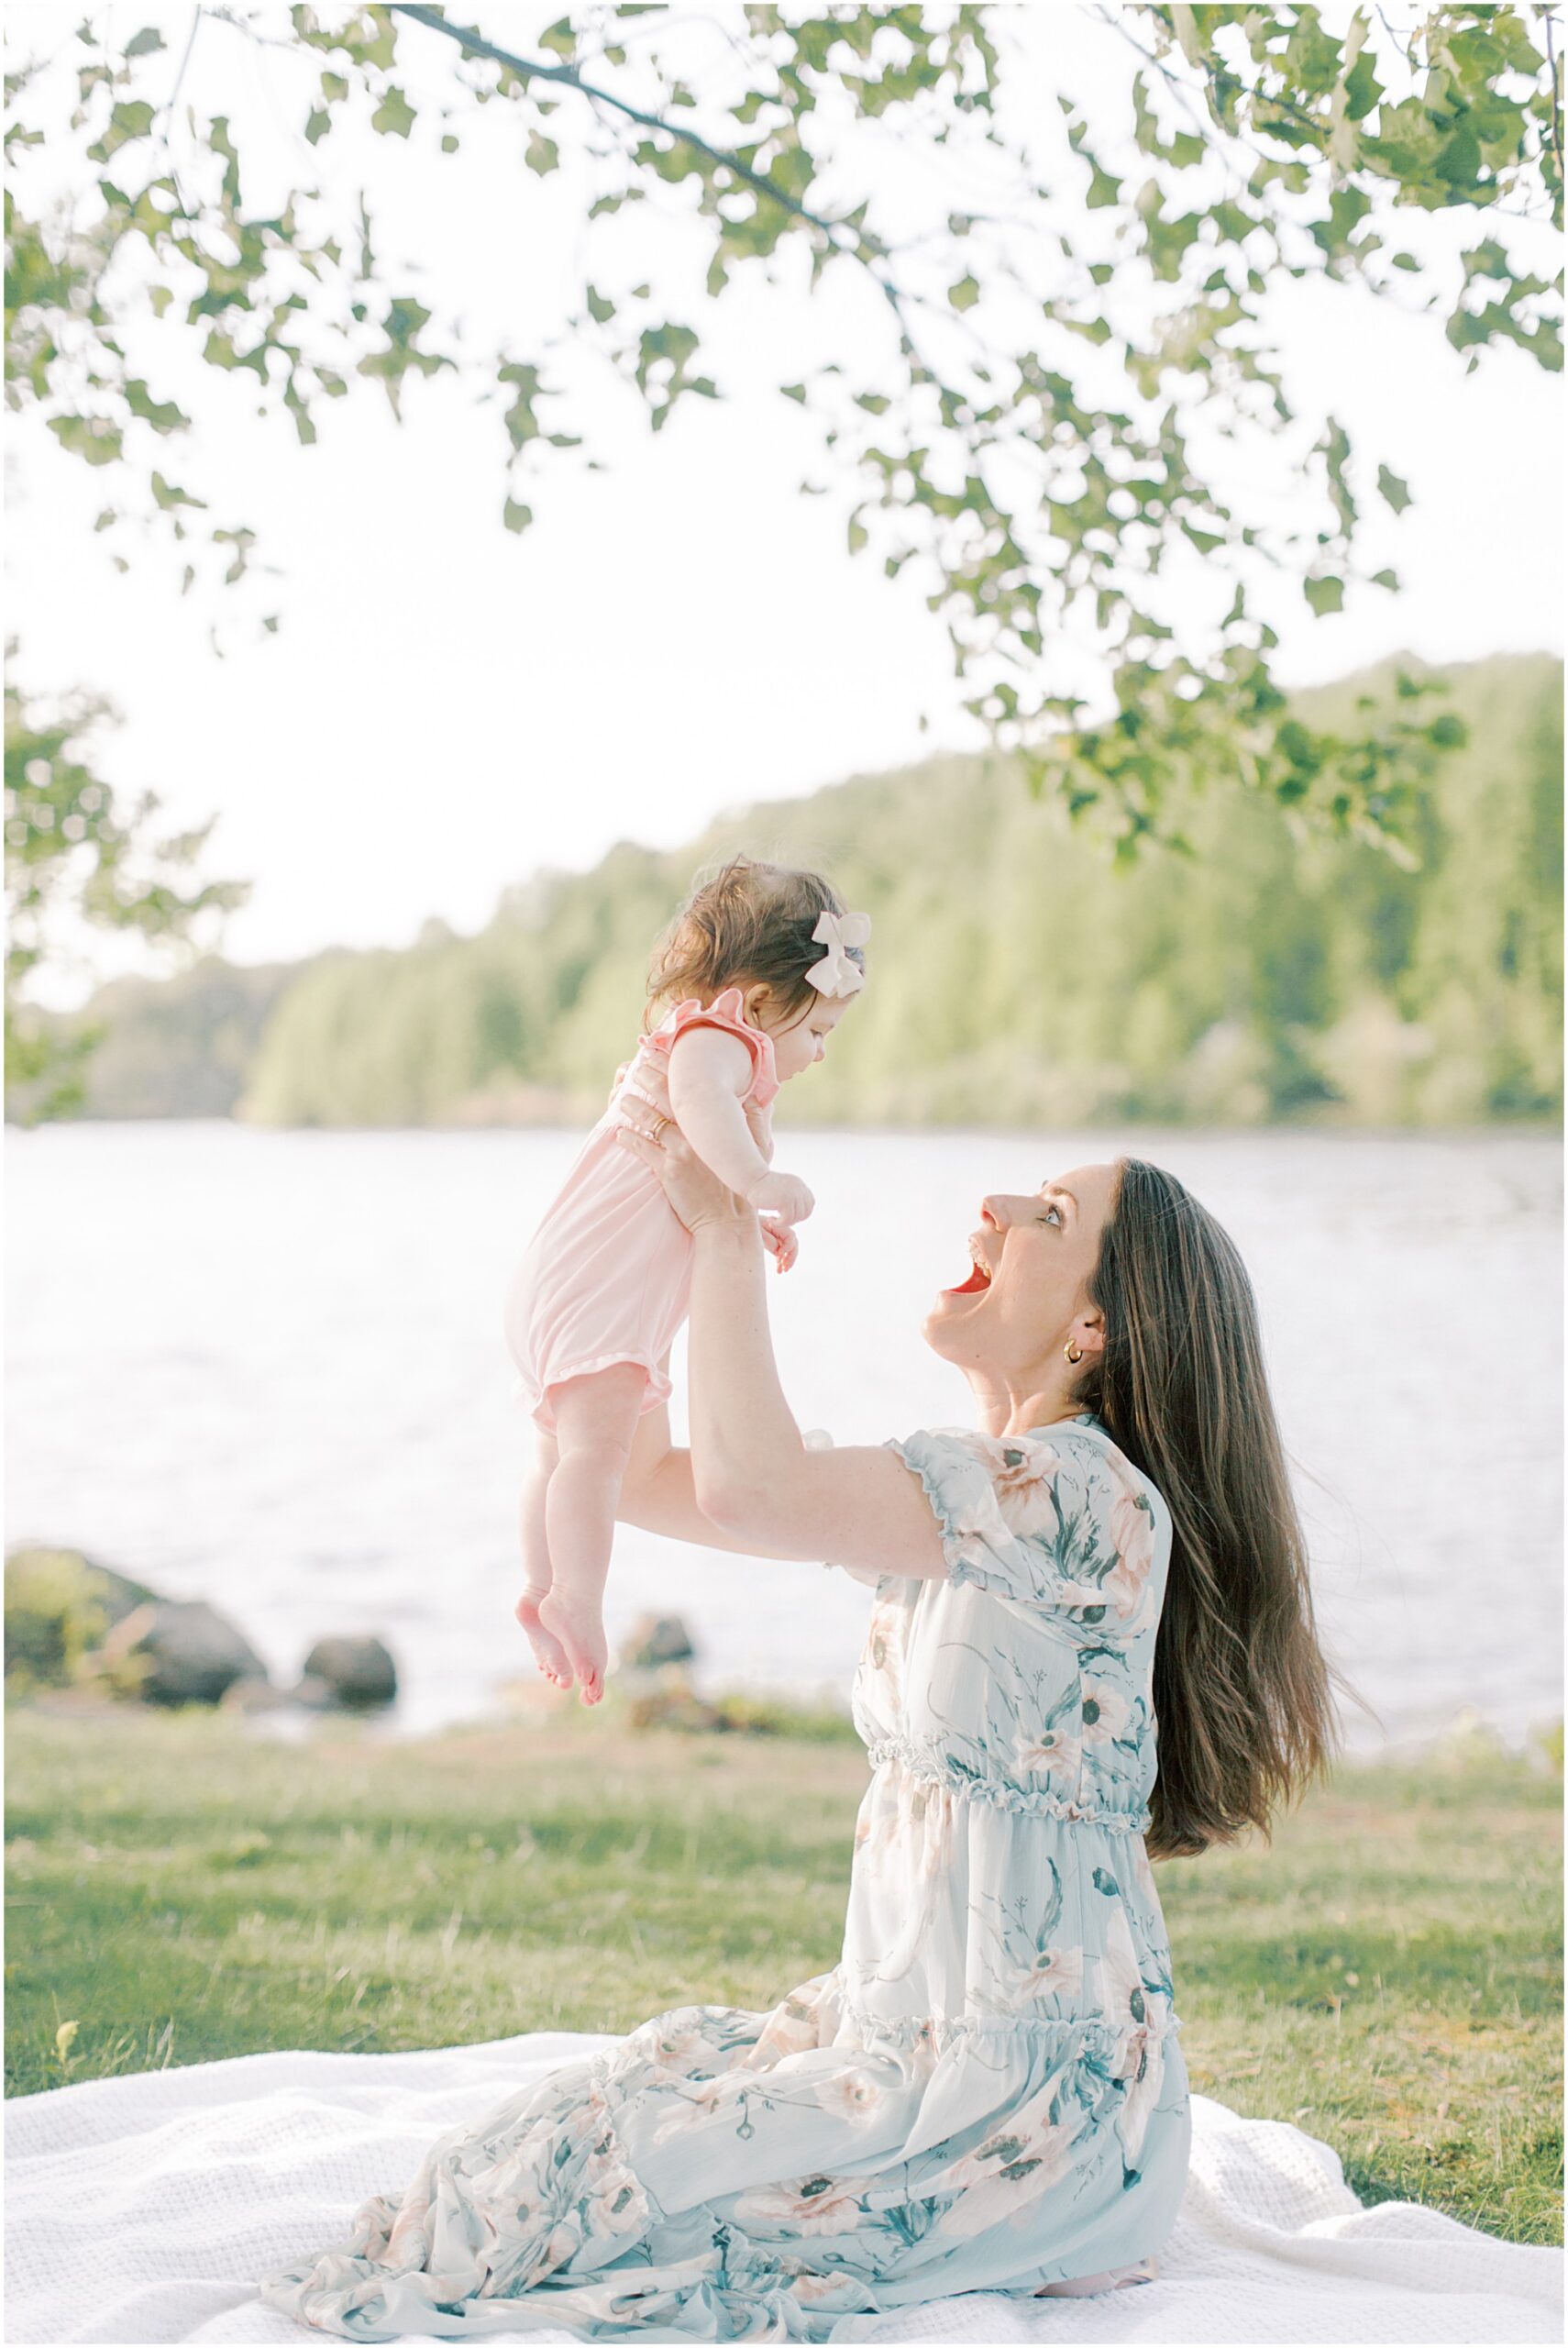 Mother holding up baby girl in the air while sitting on a blanket next to the lake